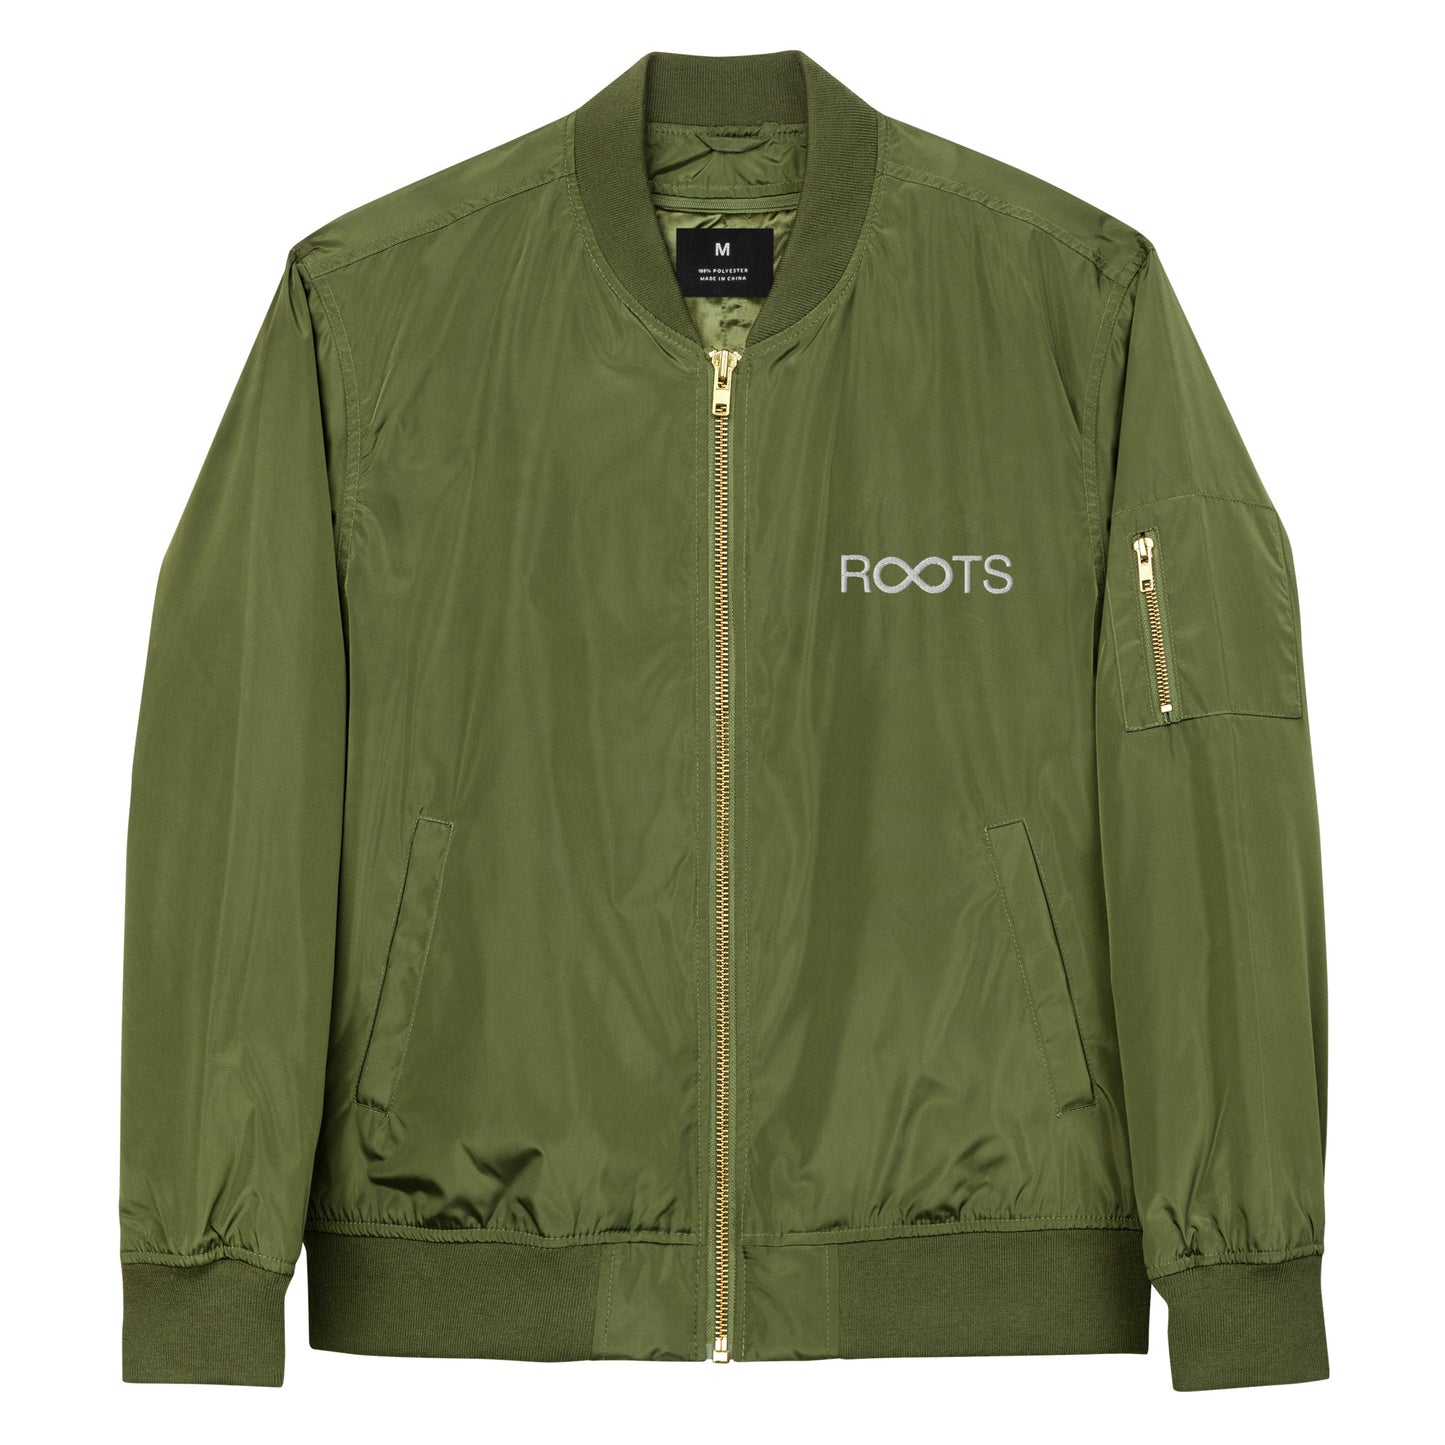 Roots Are Forever Premium recycled bomber jacket